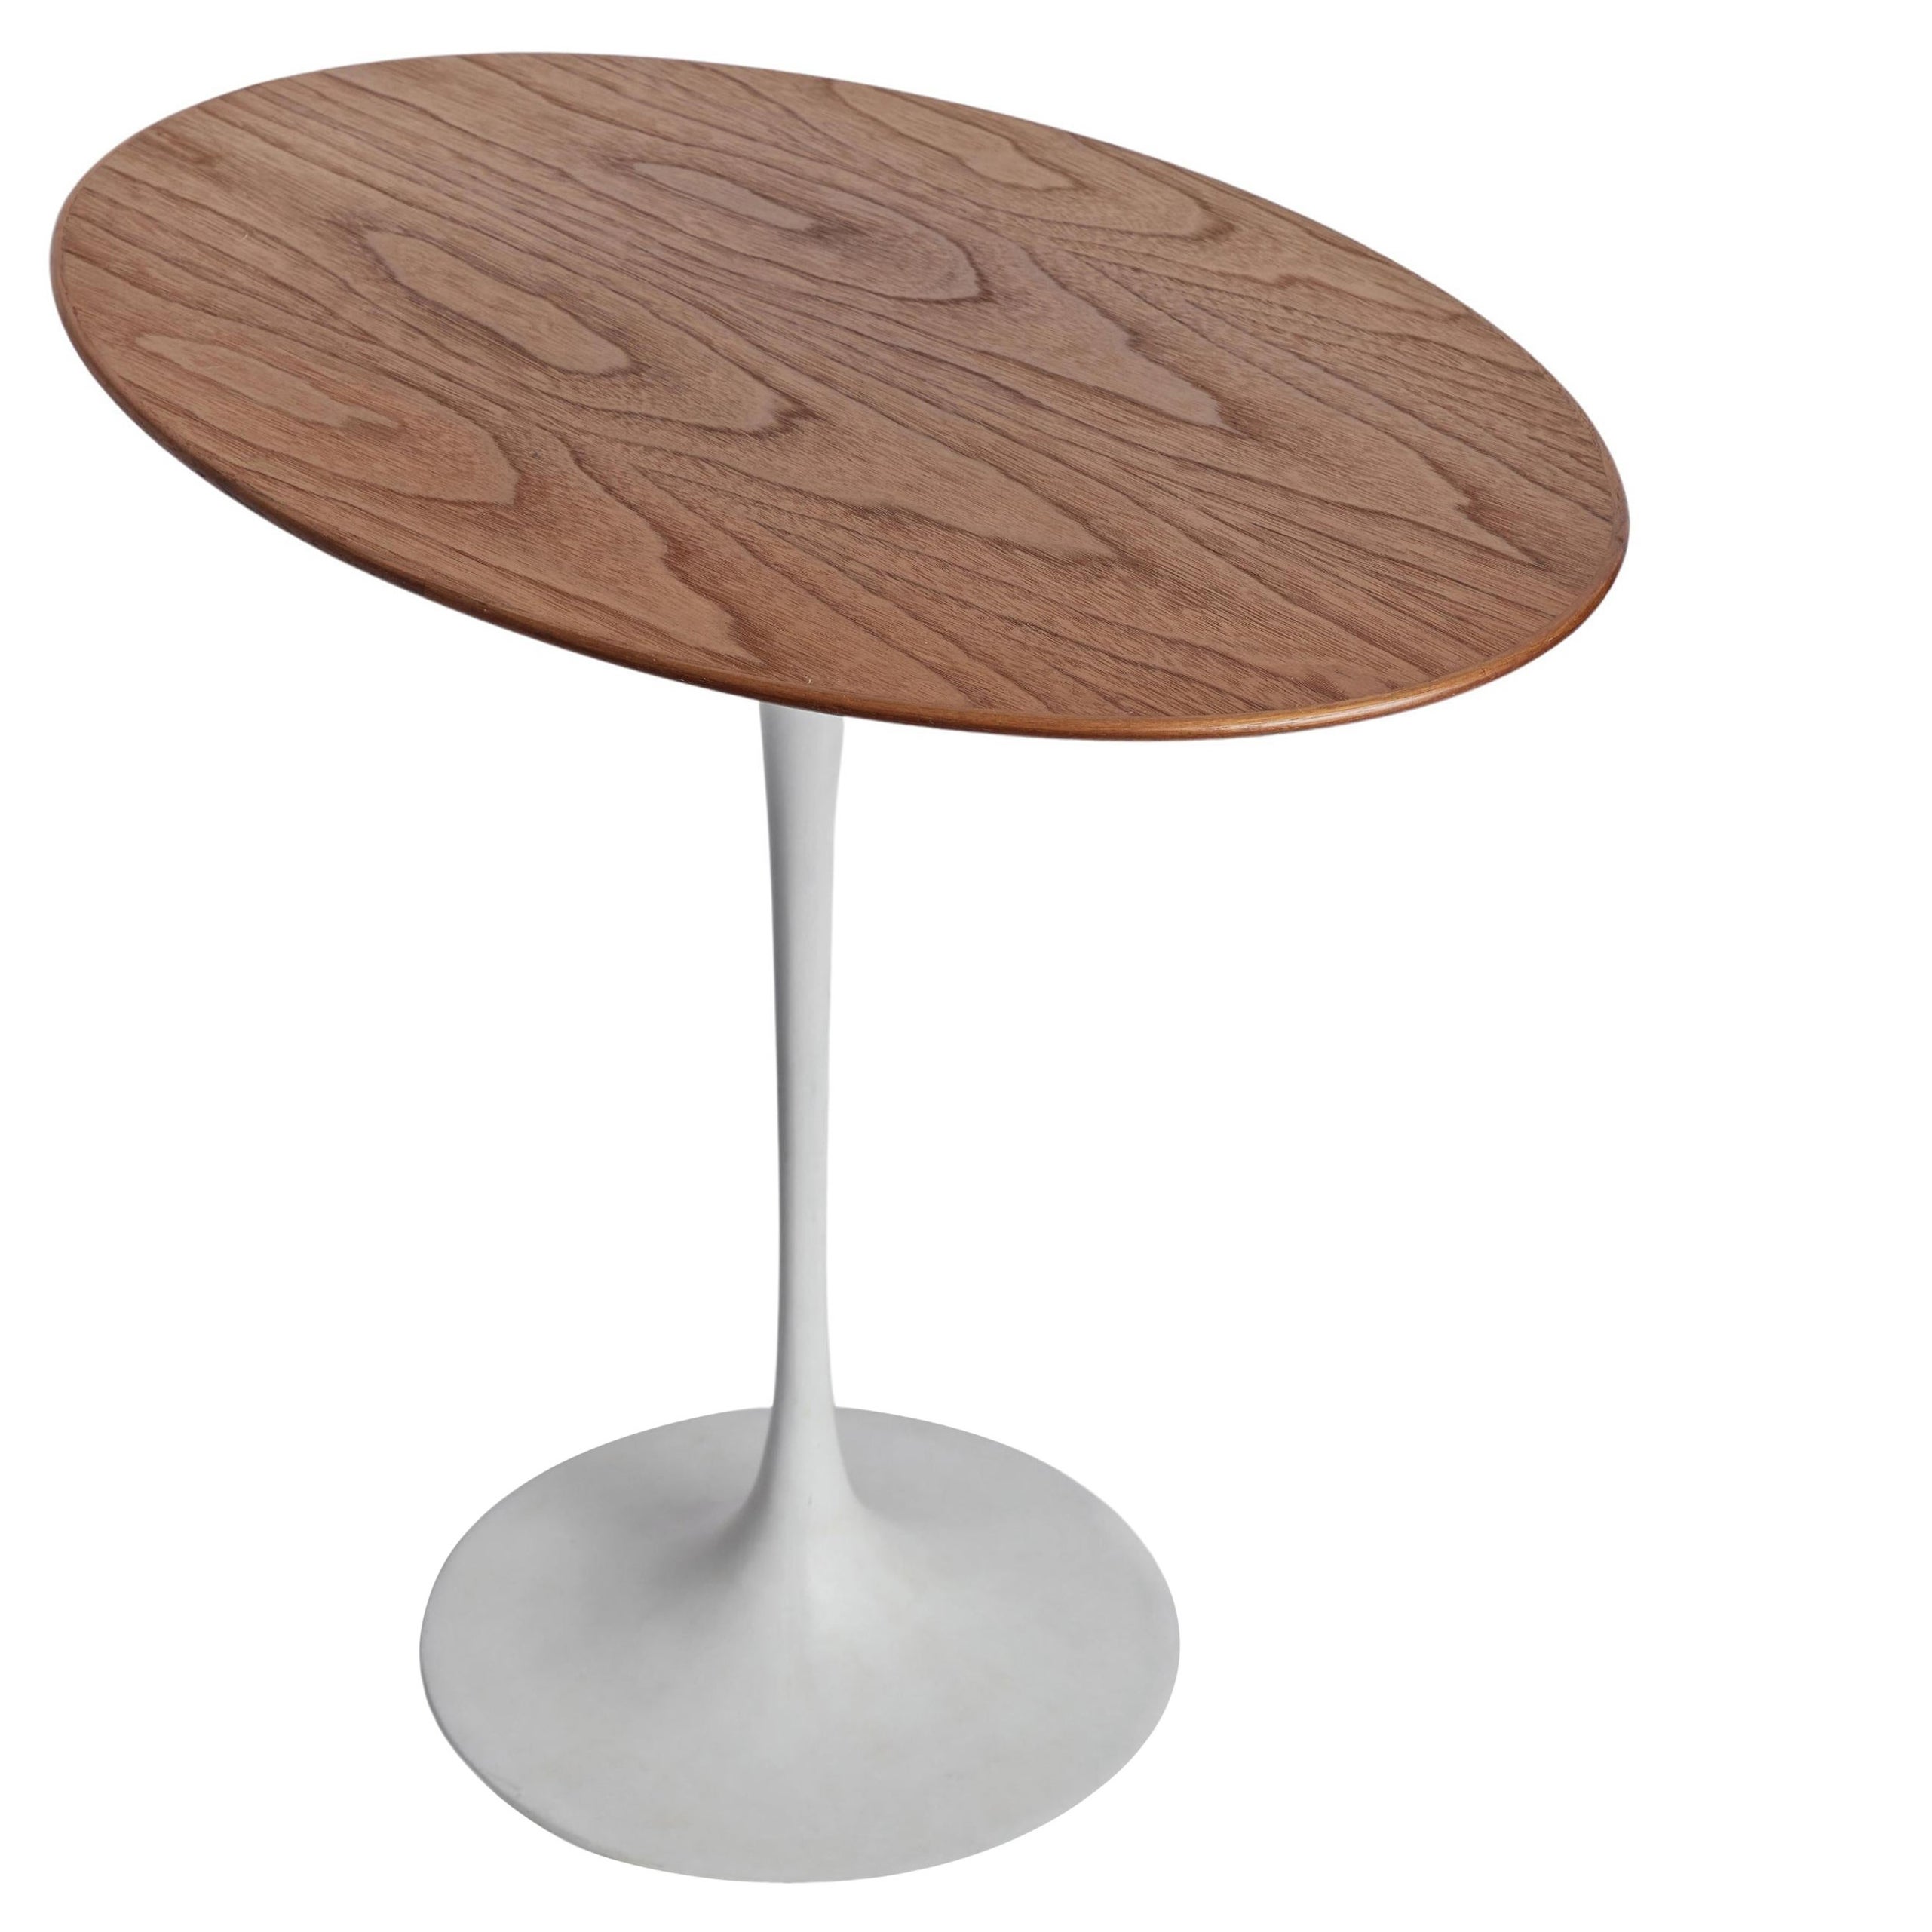 Rare 1960s Saarinen Oval Walnut Table with Early Knoll Label For Sale